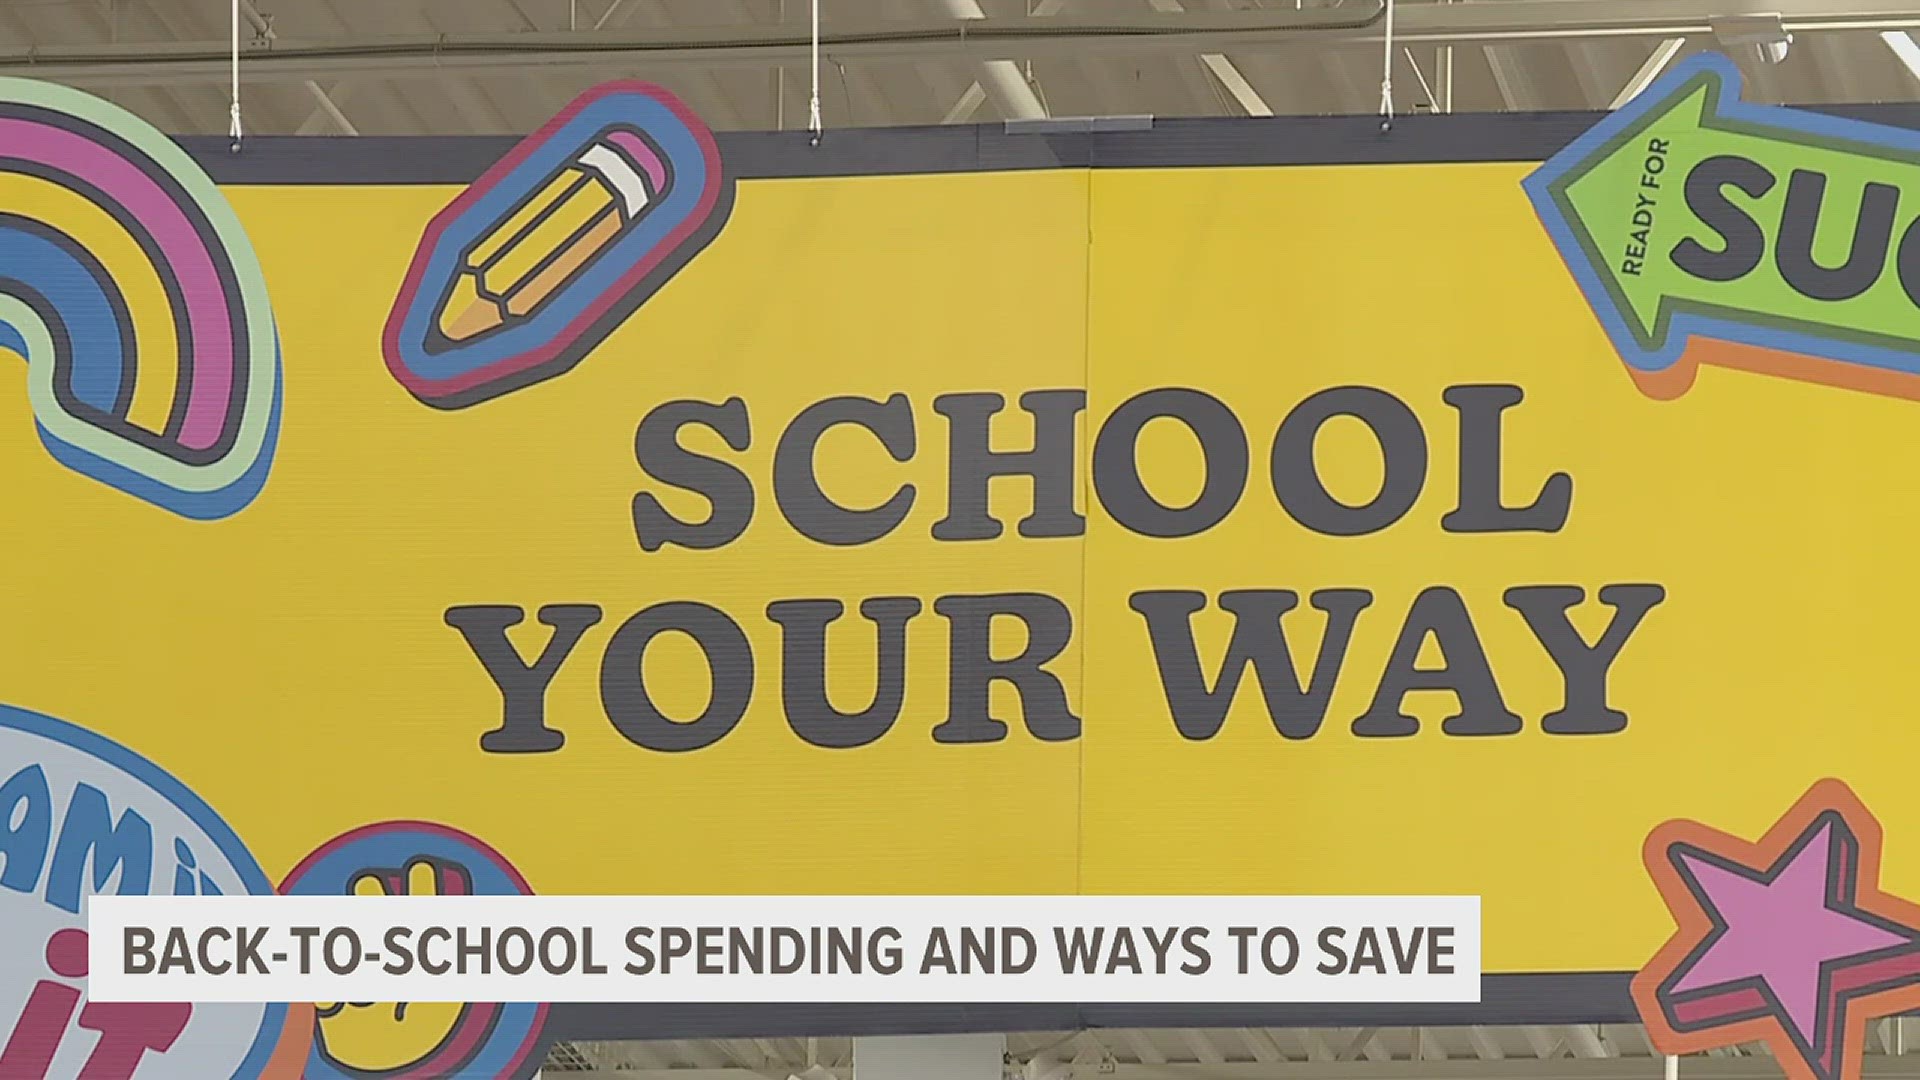 According to the National Retail Federation, American families are expected to spend more than $40 billion on back-to-school and college shopping this year.